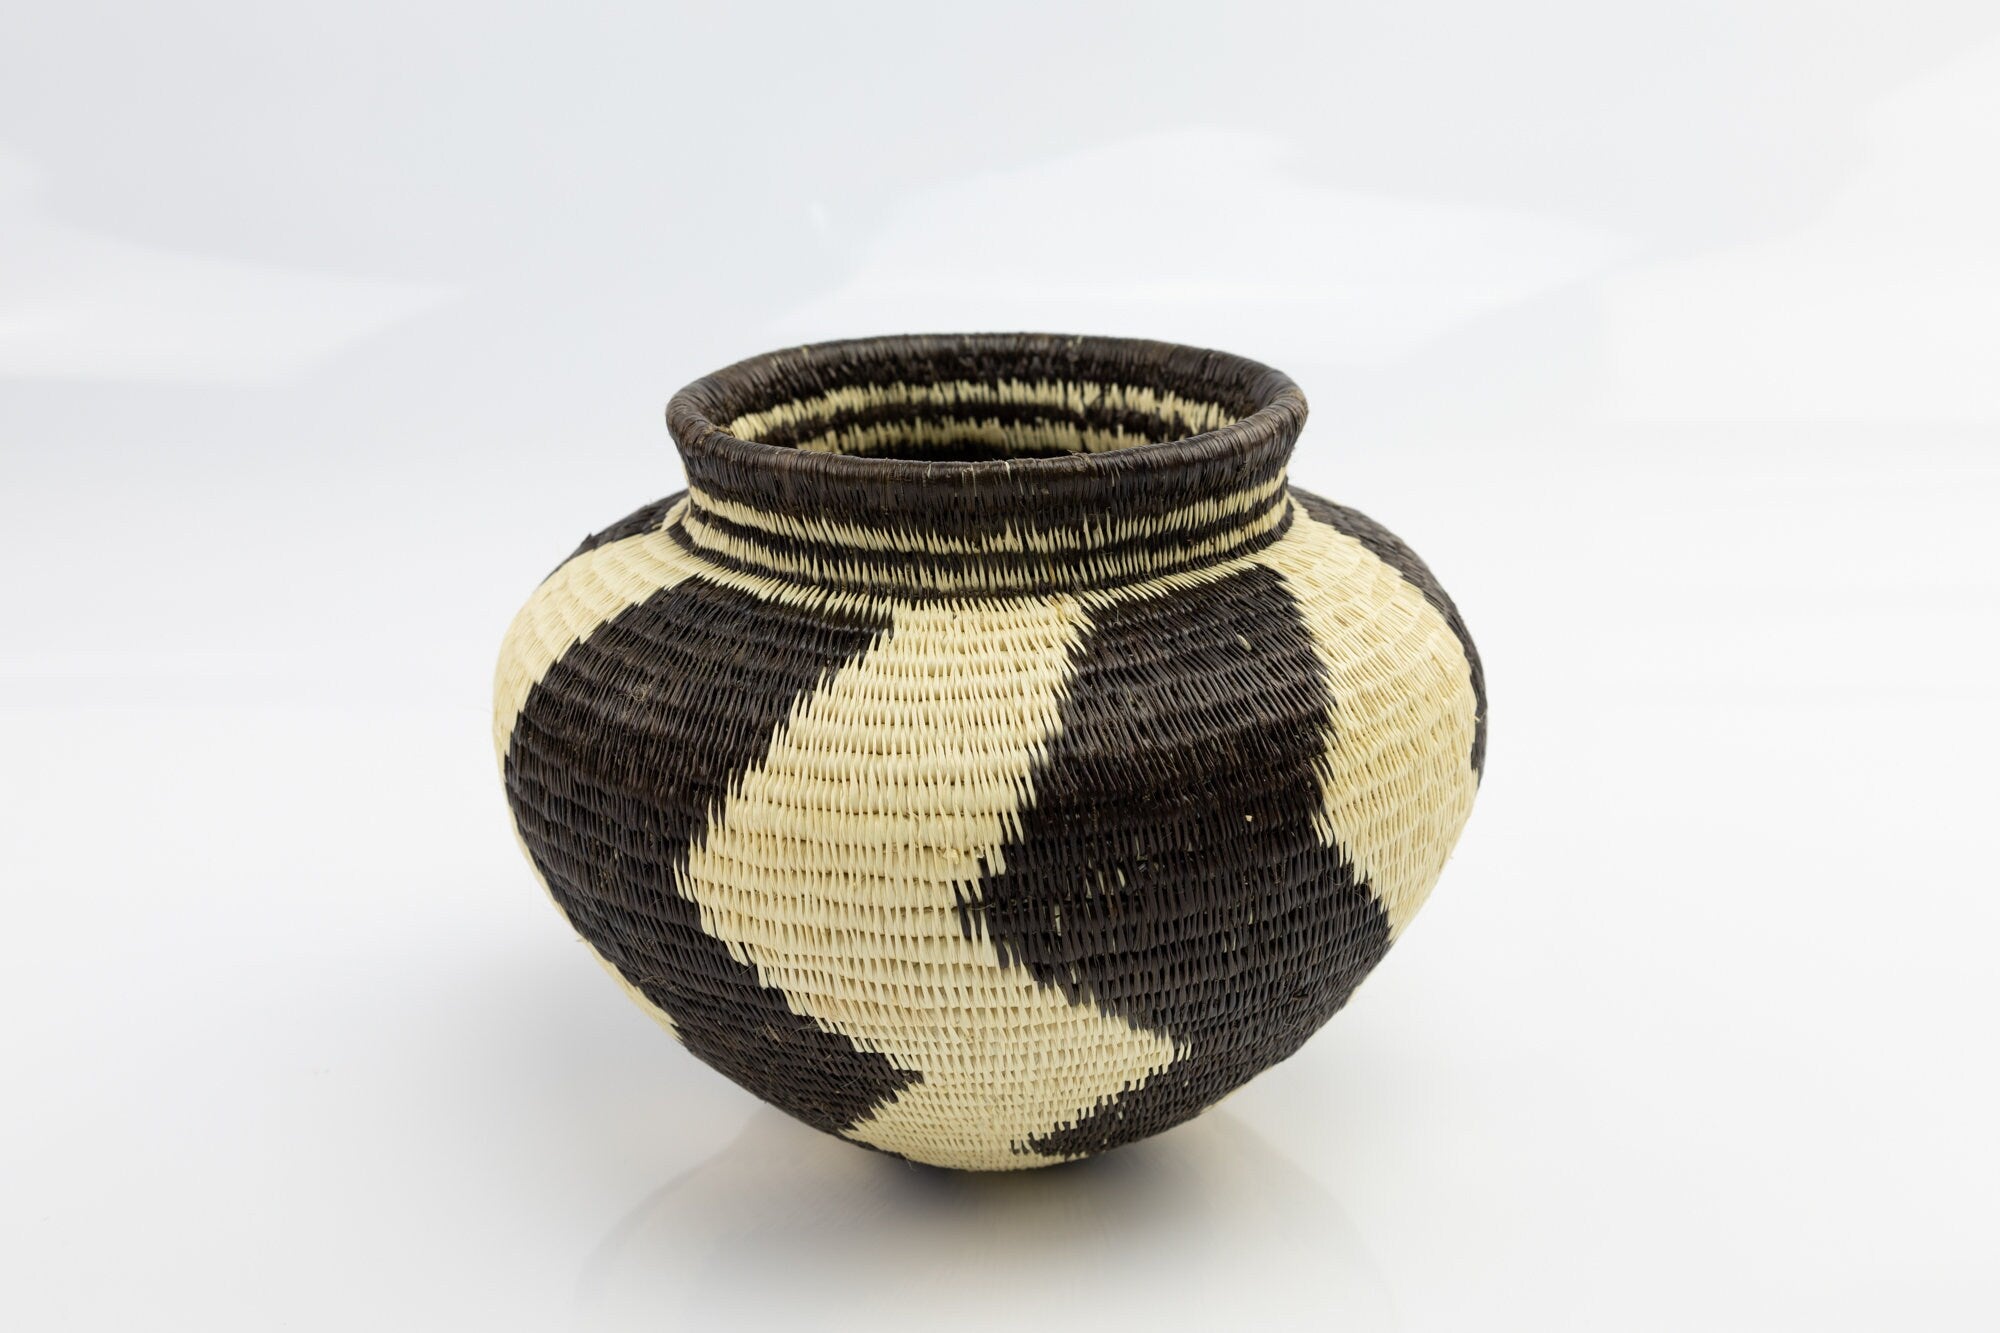 Hand Woven Black and White Basket Made By Wounaan And Emberá Panama Indians. Bowl Basket, Woven Basket, Basket Decor, Woven Storage